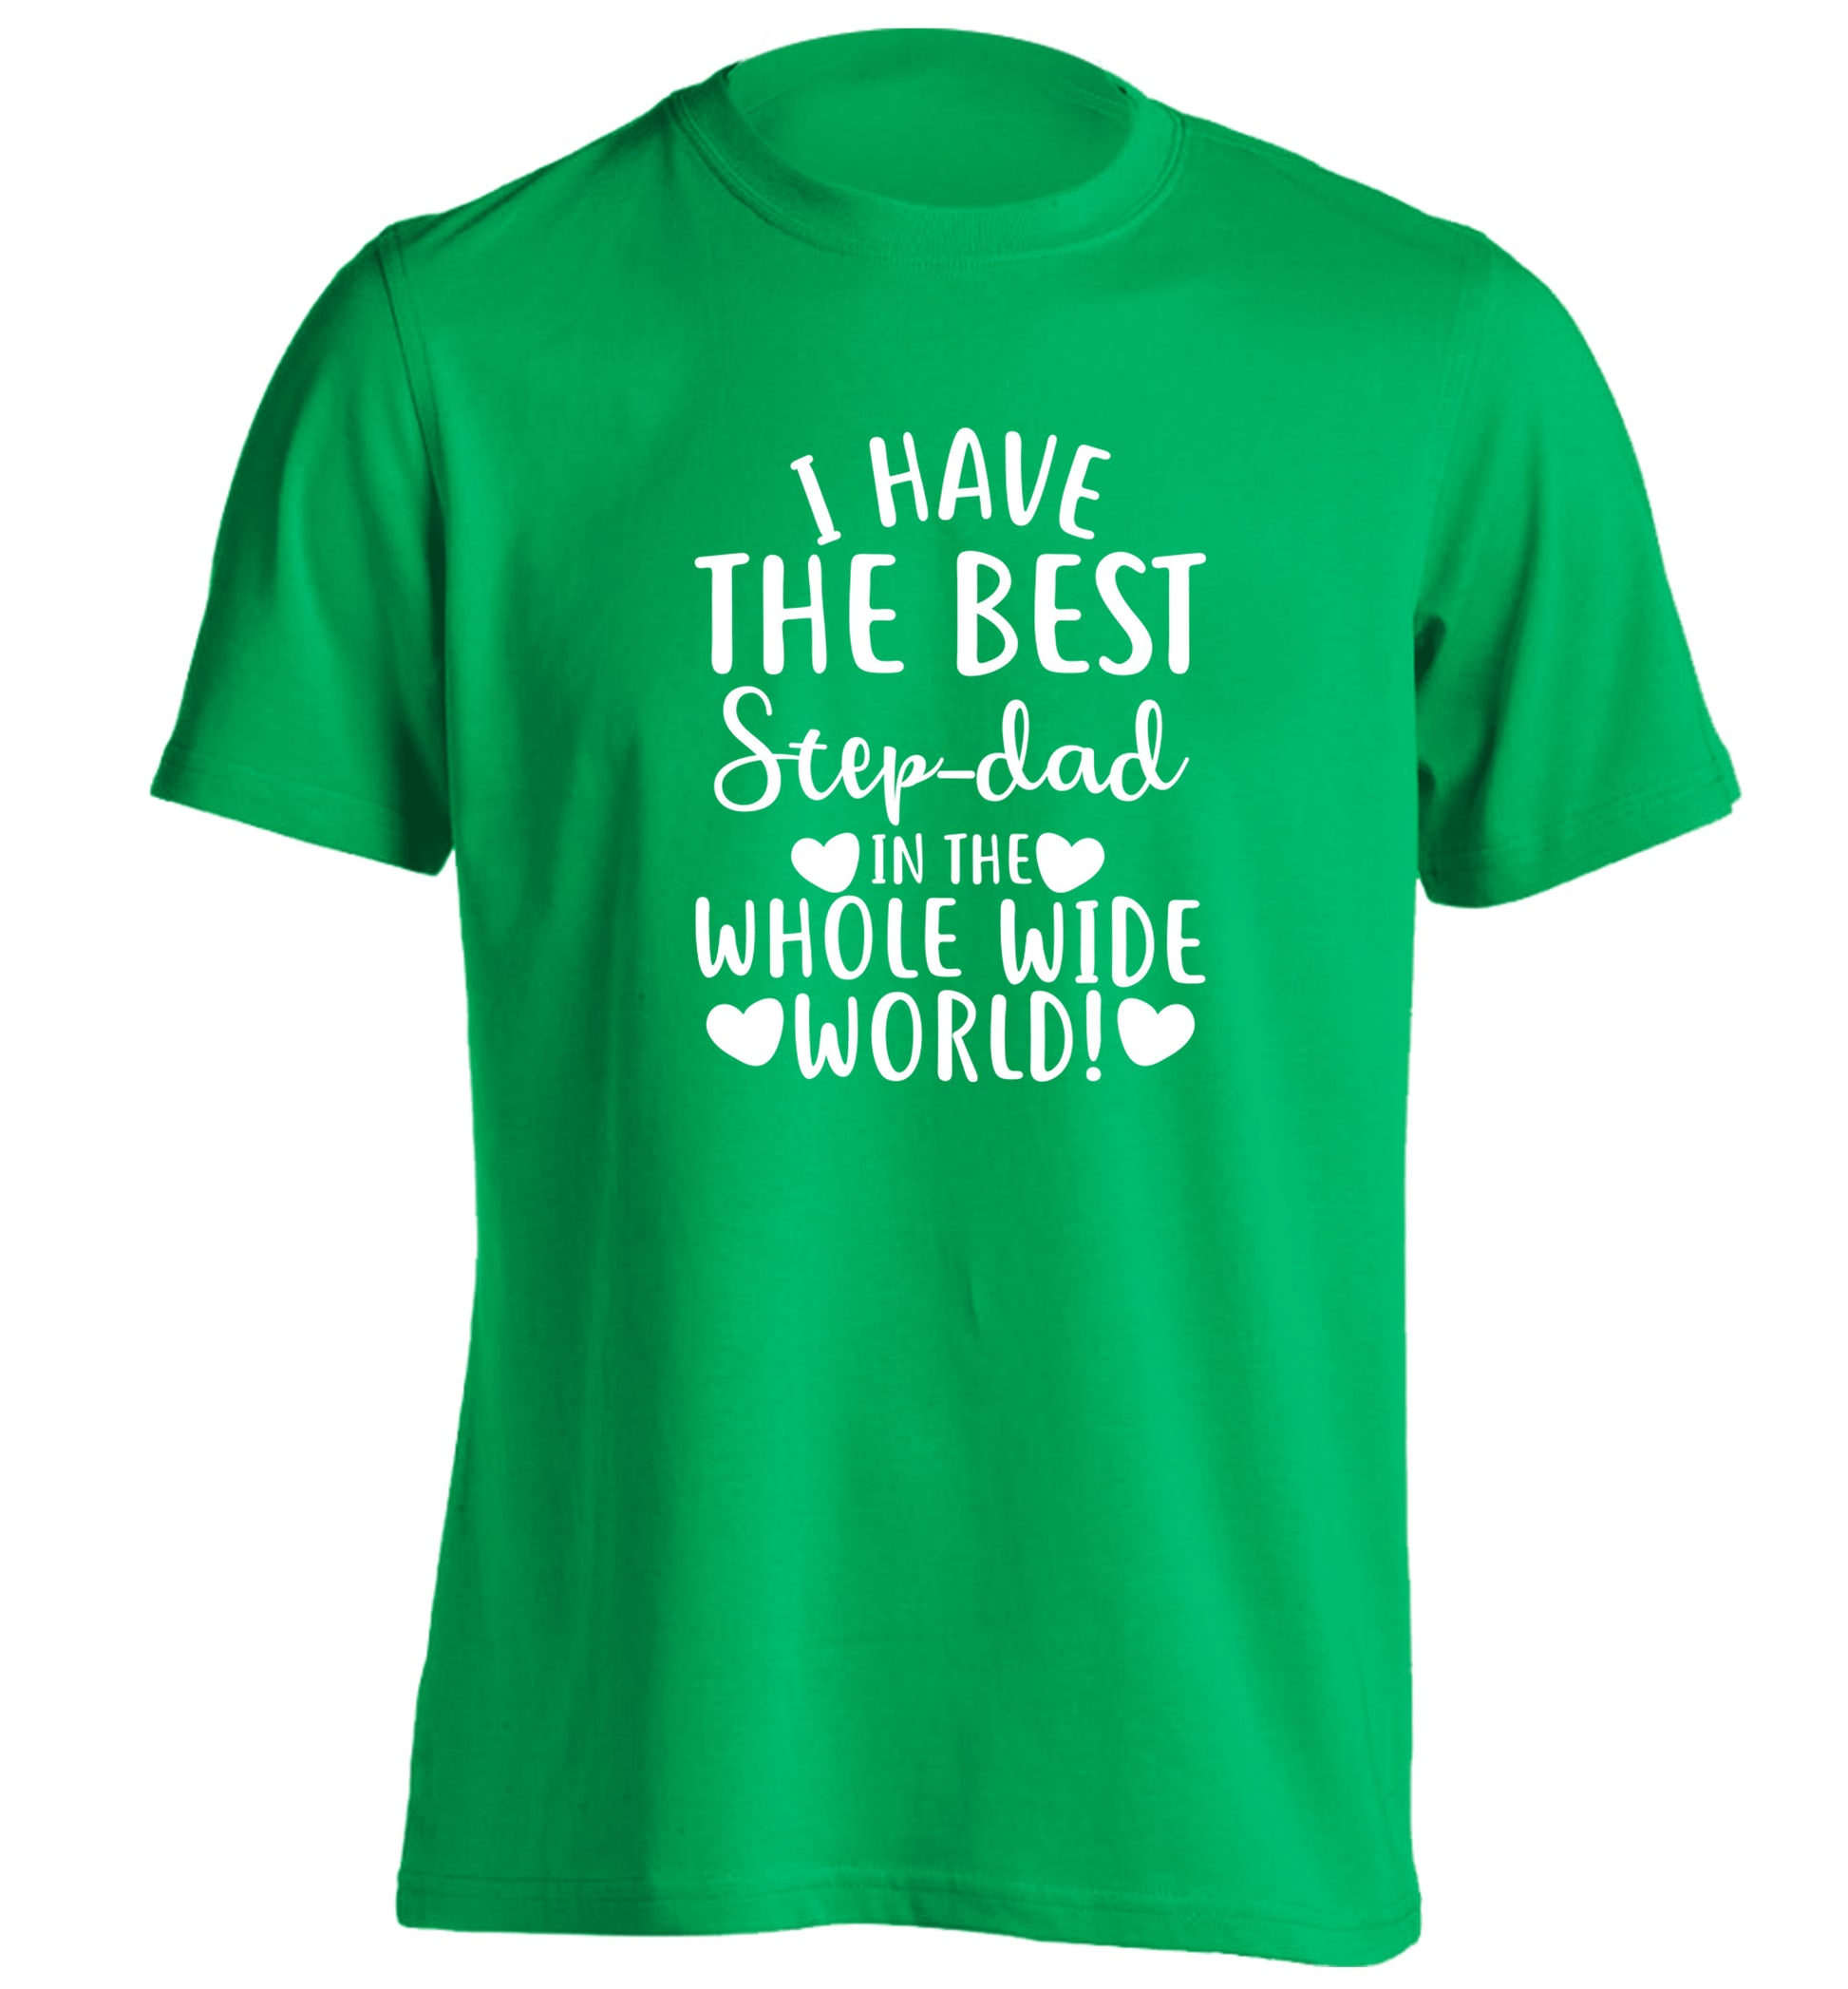 I have the best step-dad in the whole wide world! adults unisex green Tshirt 2XL